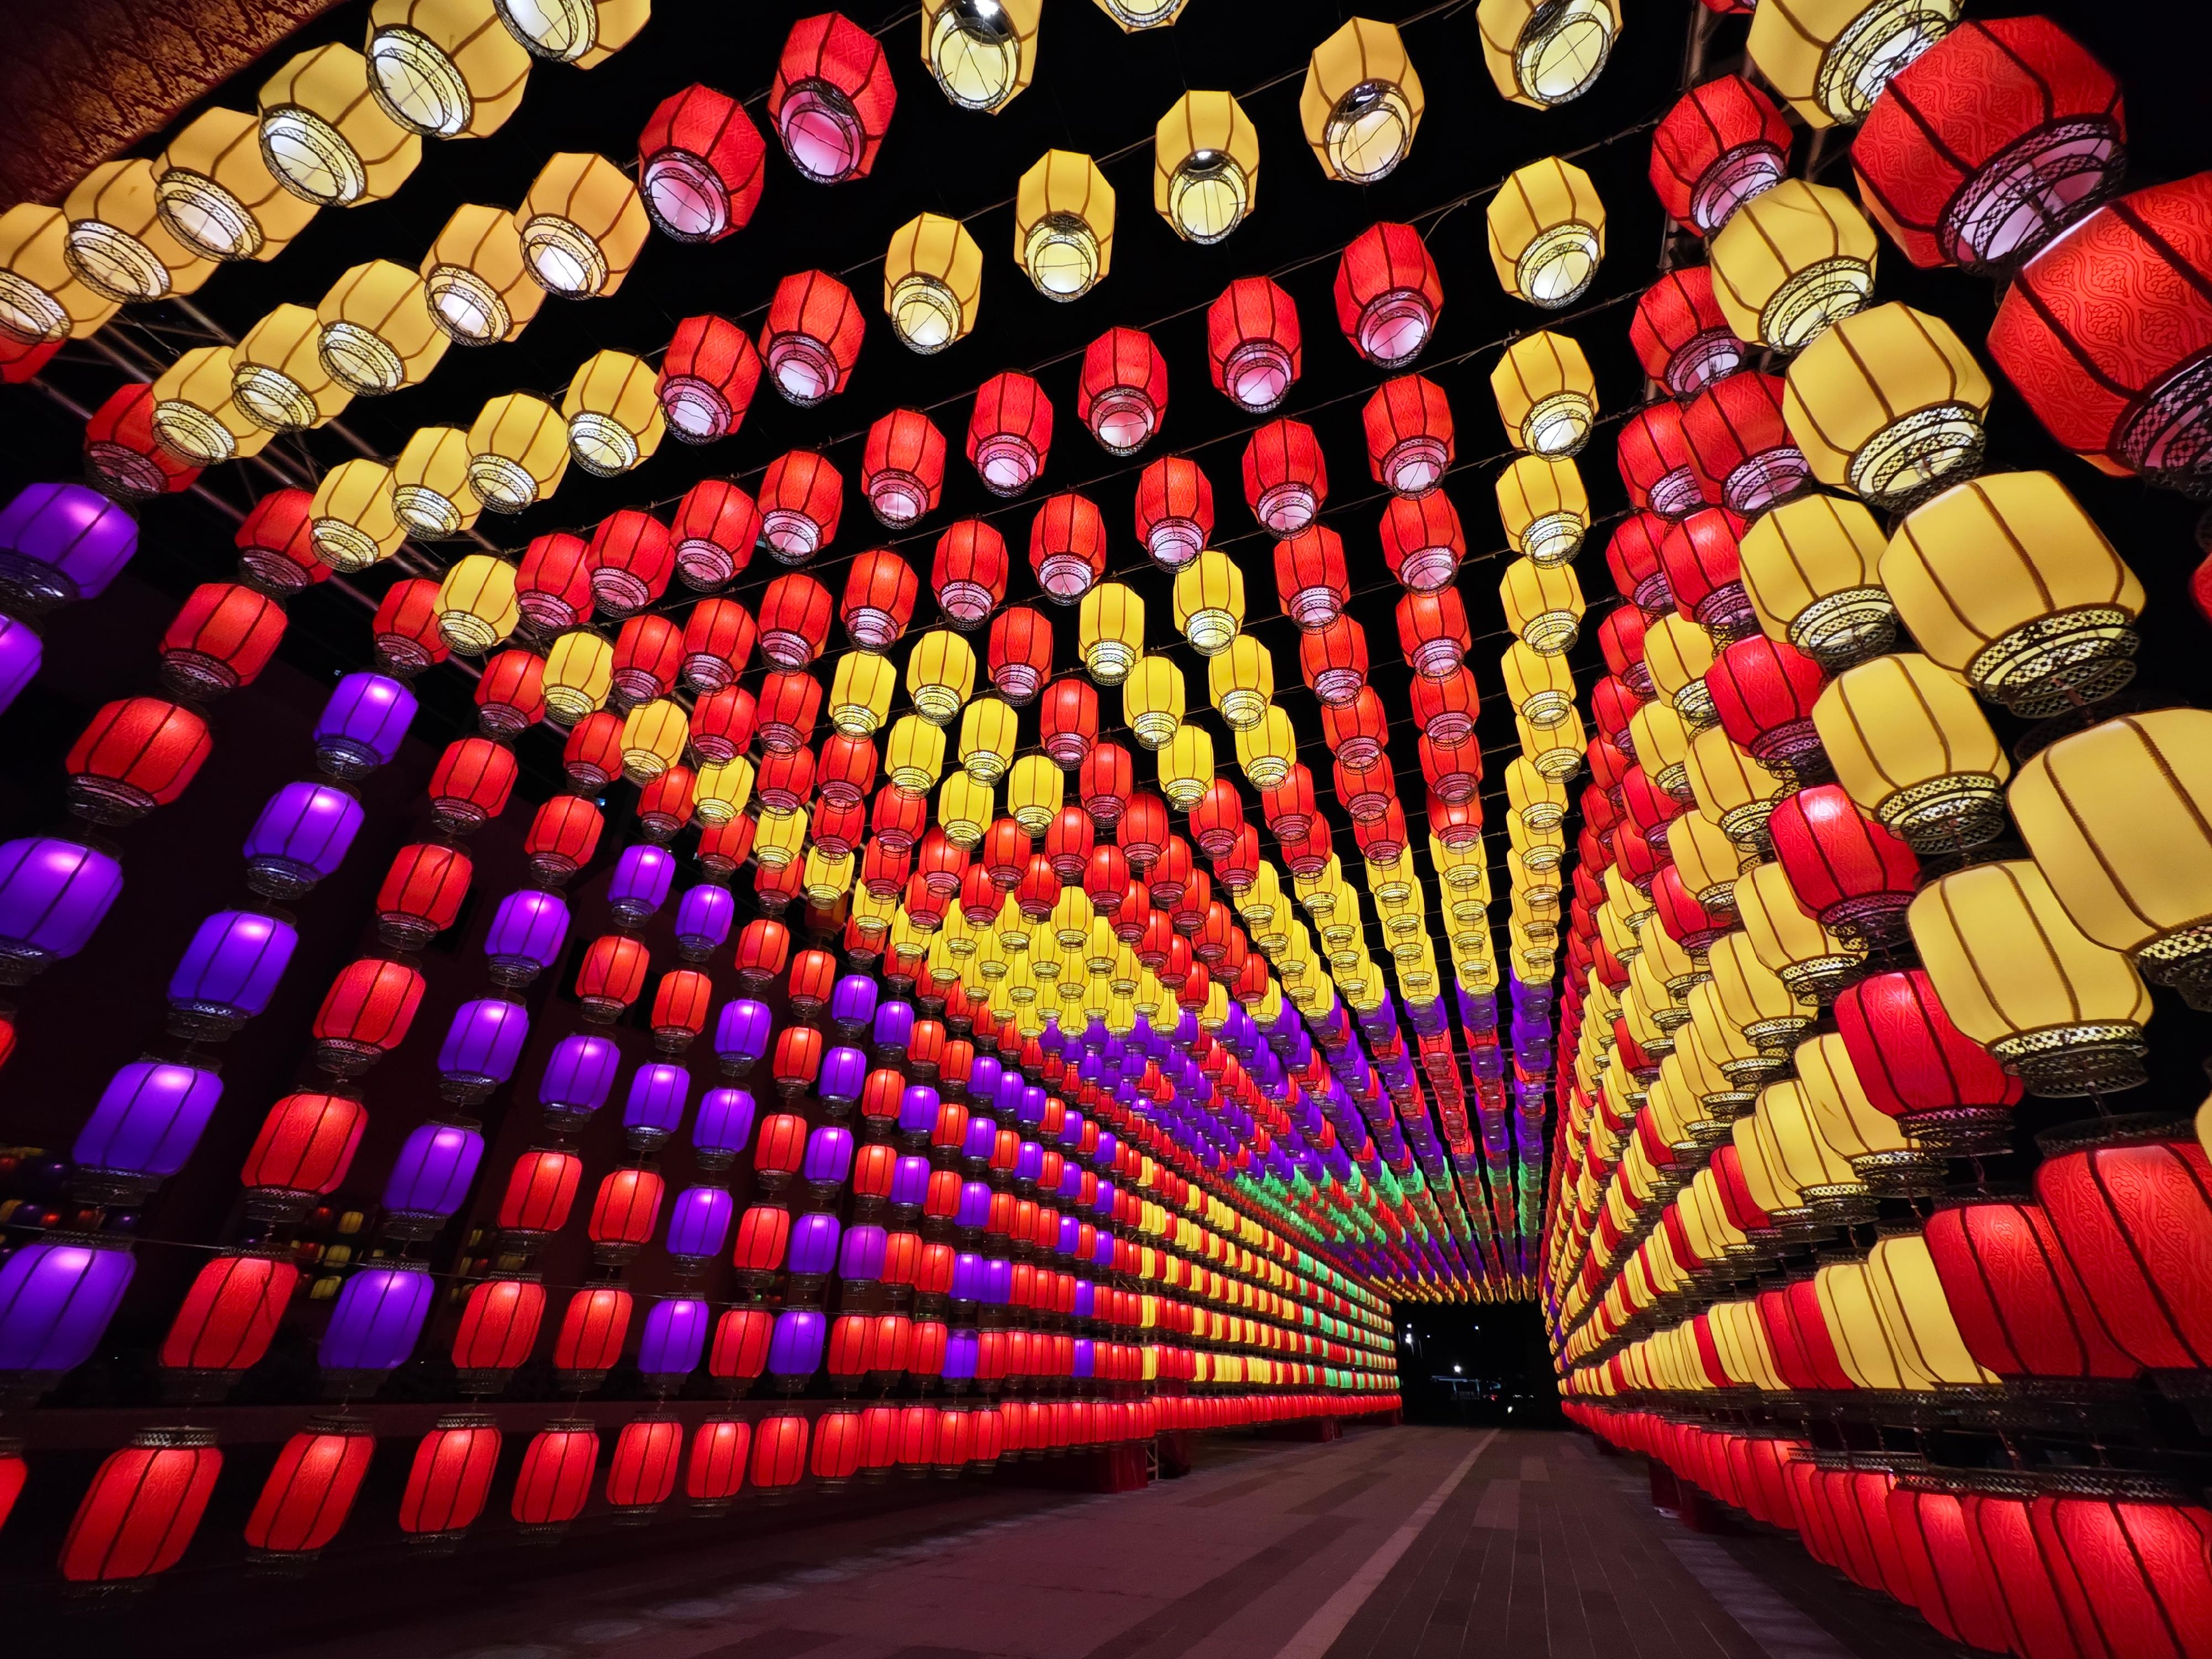 The Sustainable Lantau Office under the Civil Engineering and Development Department and the Islands District Office will organise the Happy Moon Lantern Festival at Tung Chung East Promenade from tomorrow (September 23) to October 8. Photo shows the lantern corridor.